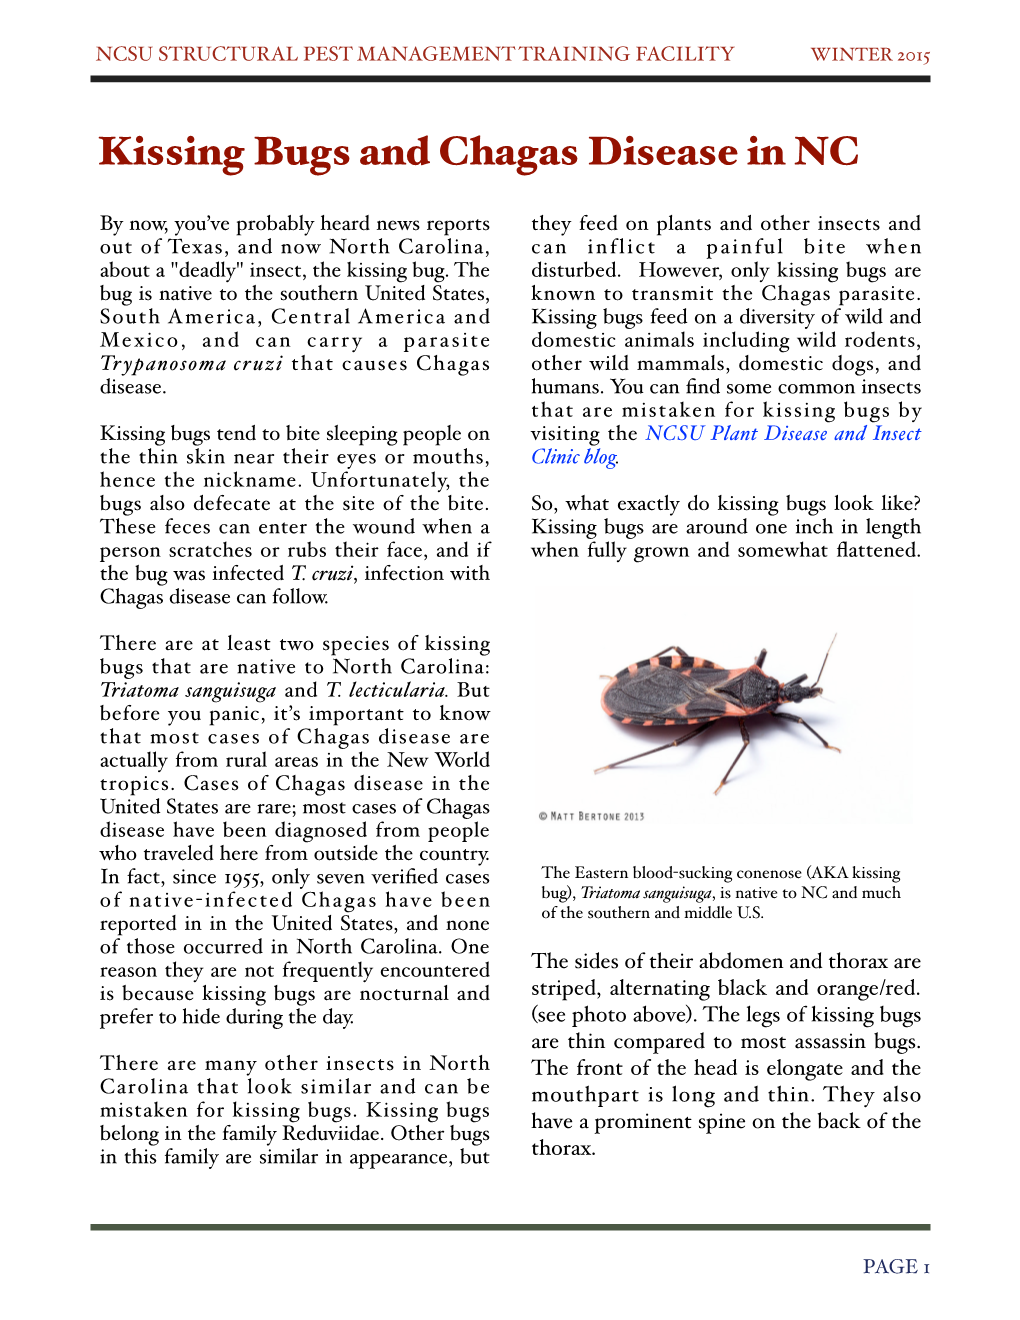 Kissing Bugs and Chagas Disease in NC